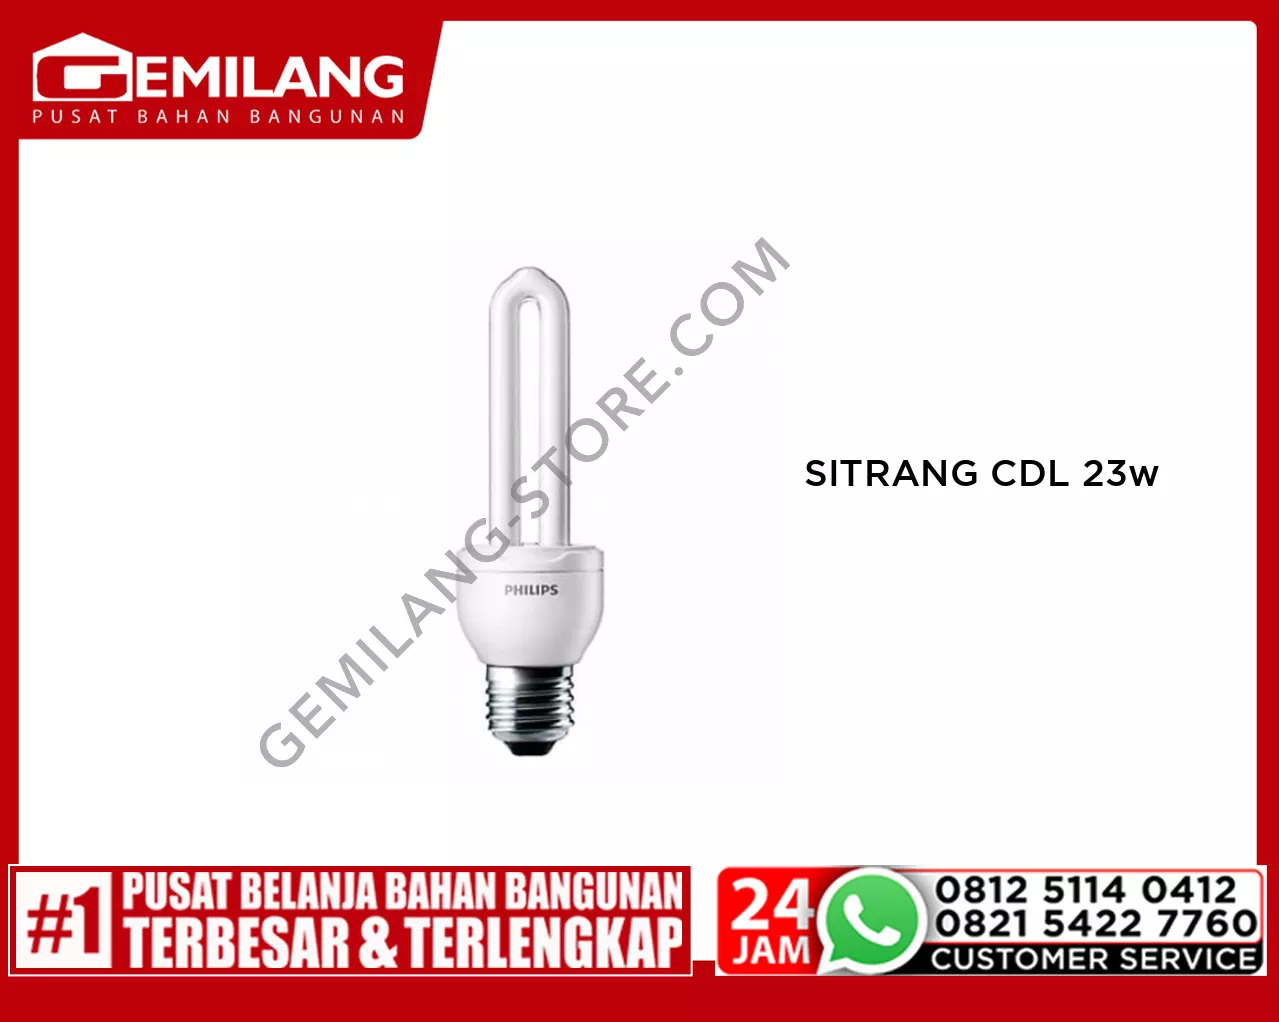 PHILIPS SITRANG CDL 23w